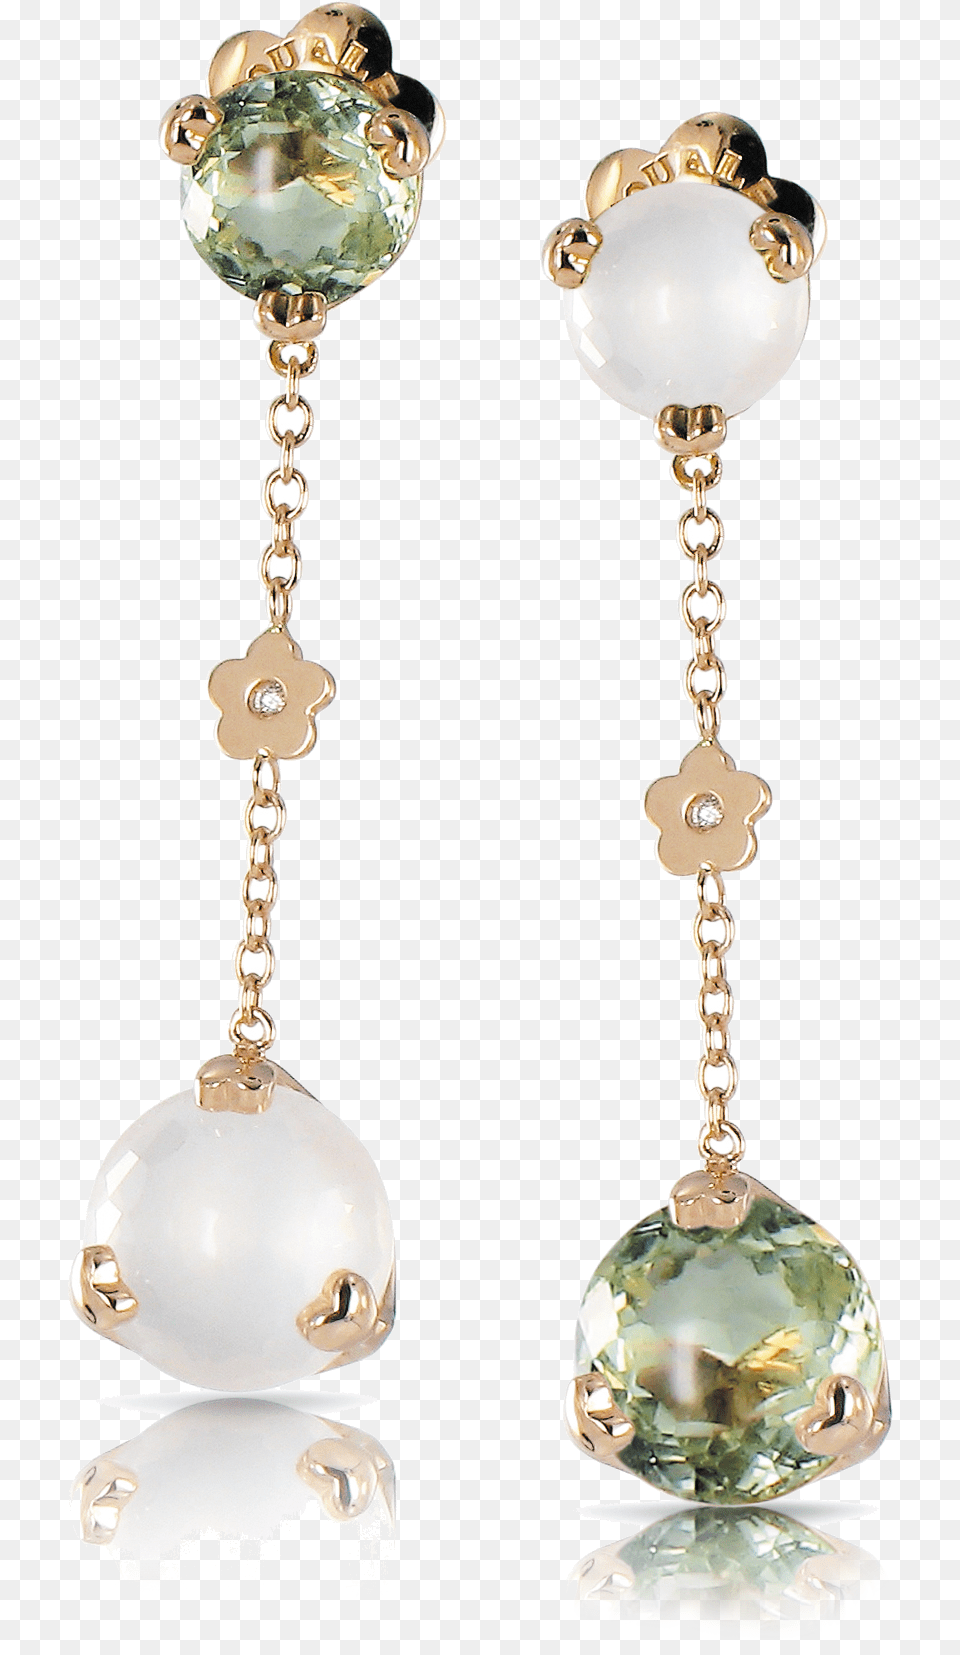 Jewelry Art Vintage Jewelry Jewelry Design Fine Earrings, Accessories, Earring, Necklace Png Image